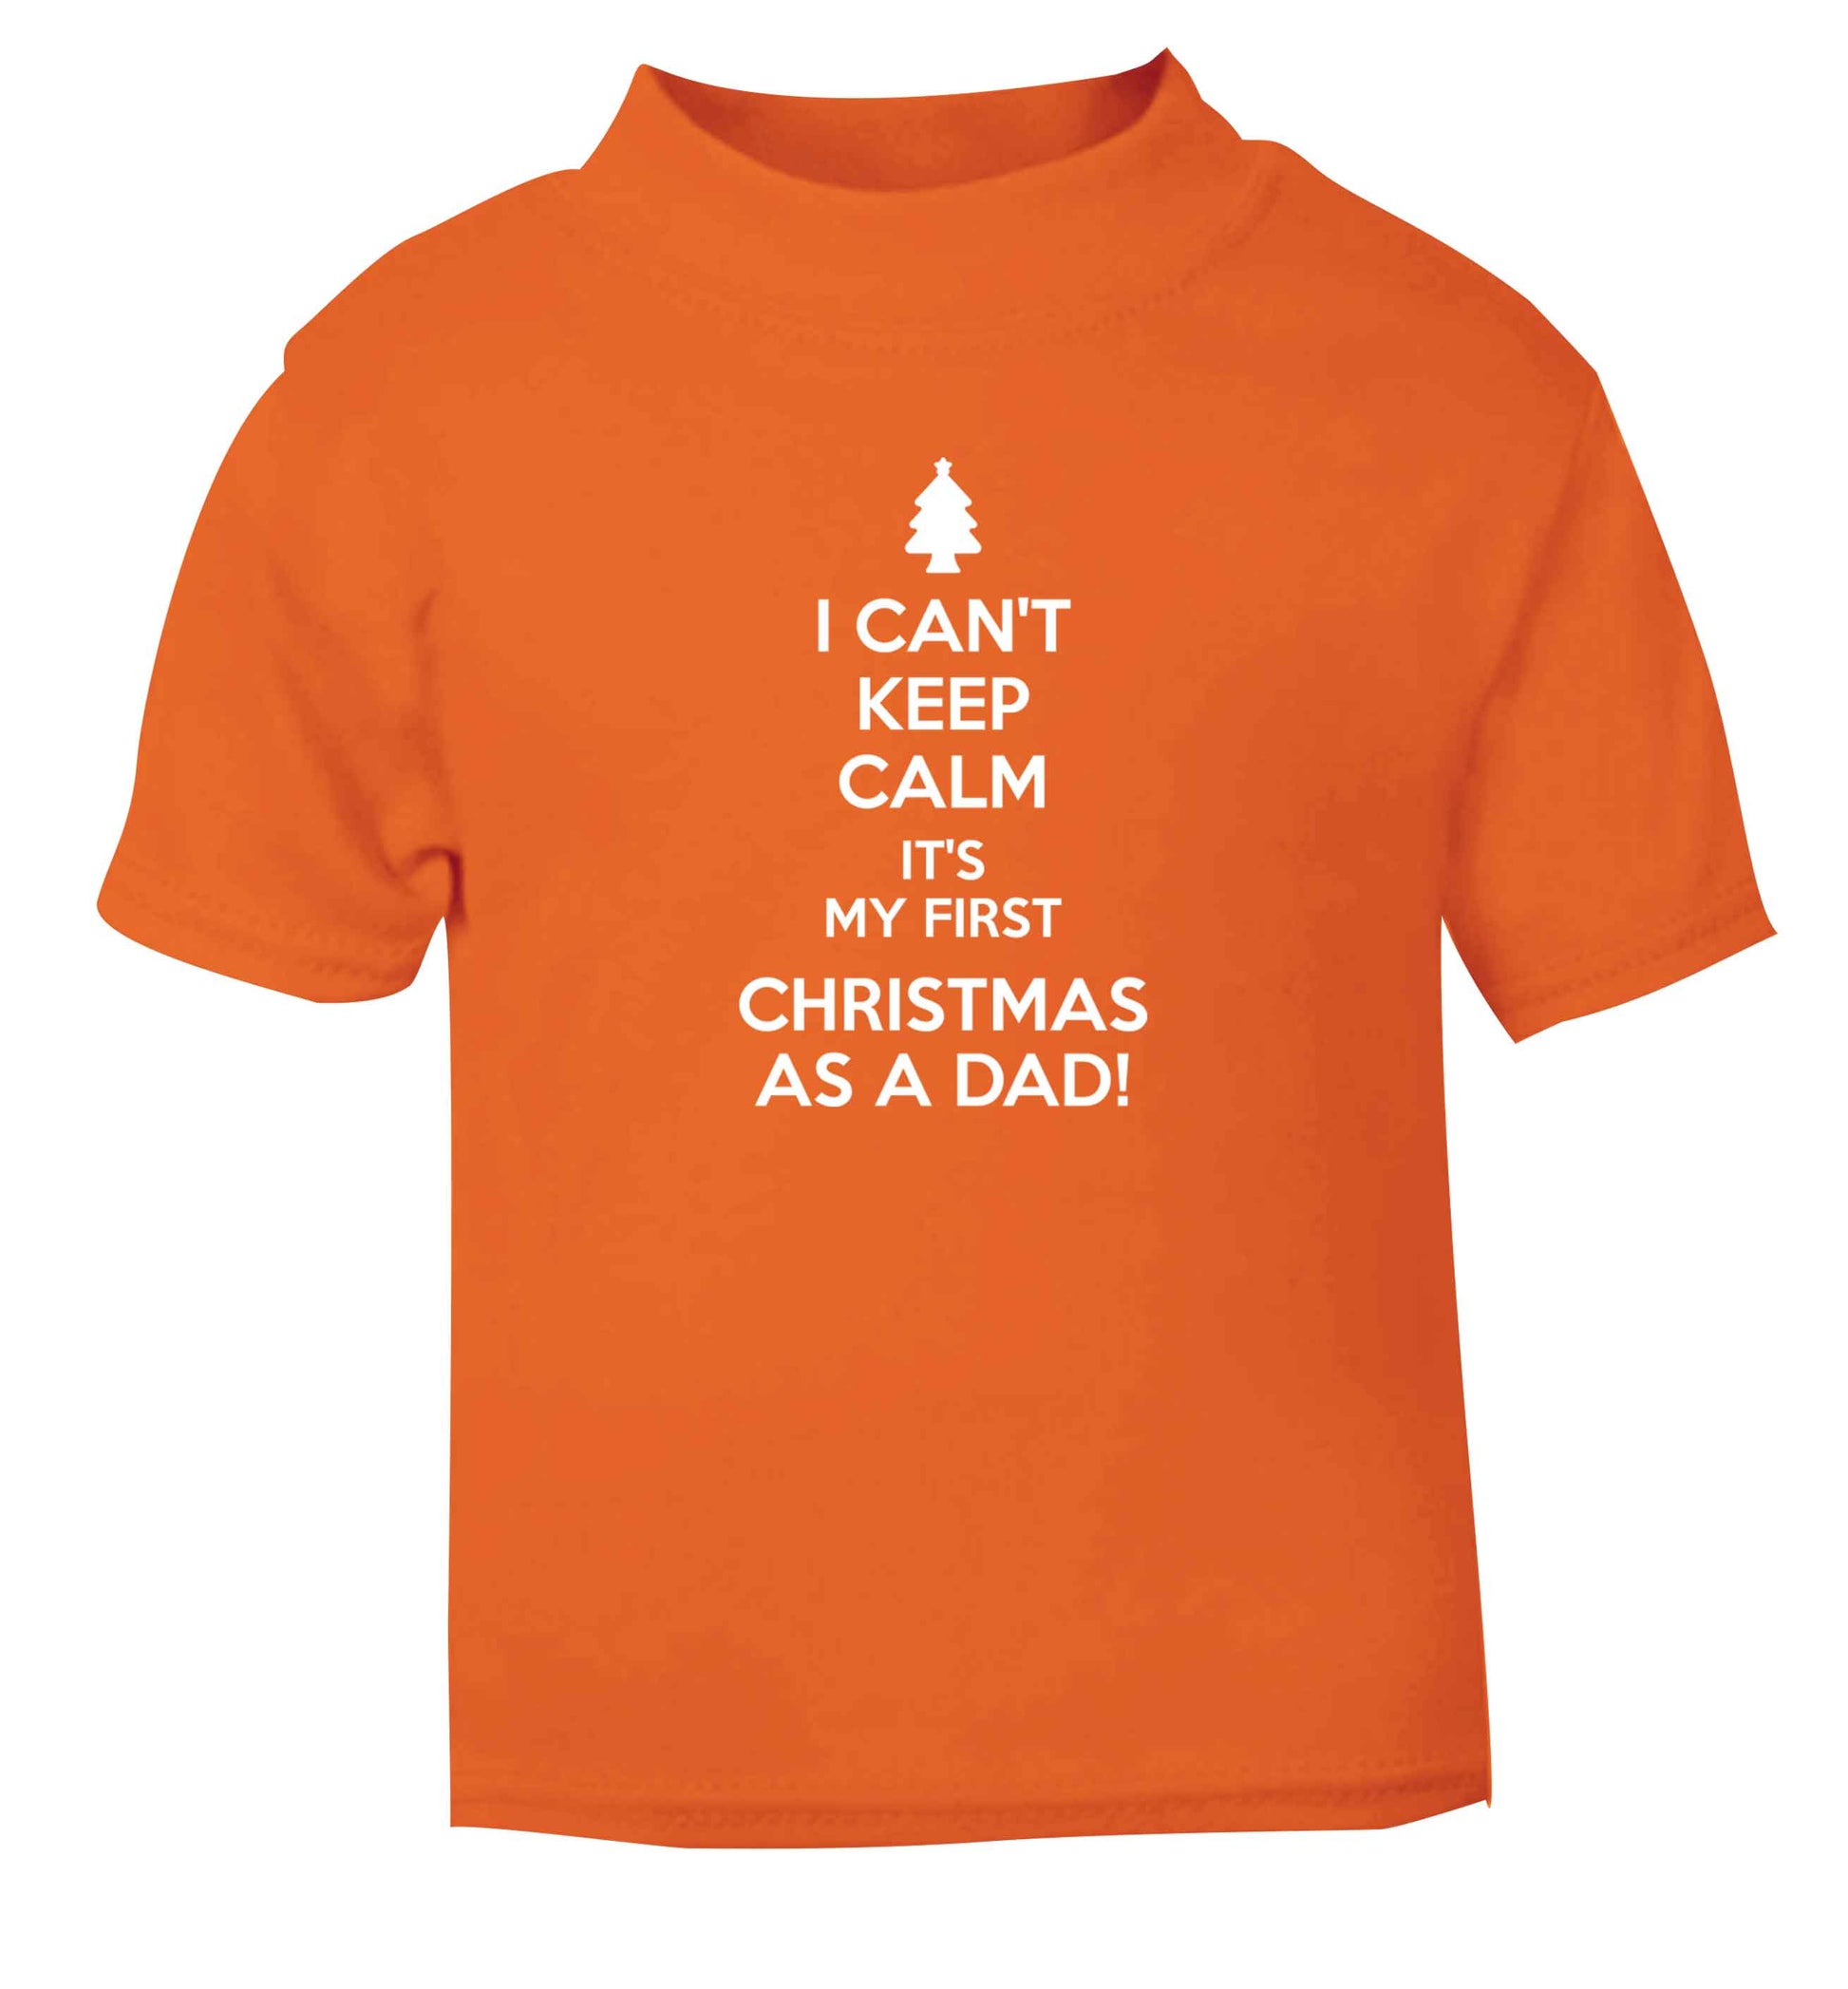 I can't keep calm it's my first Christmas as a dad orange Baby Toddler Tshirt 2 Years